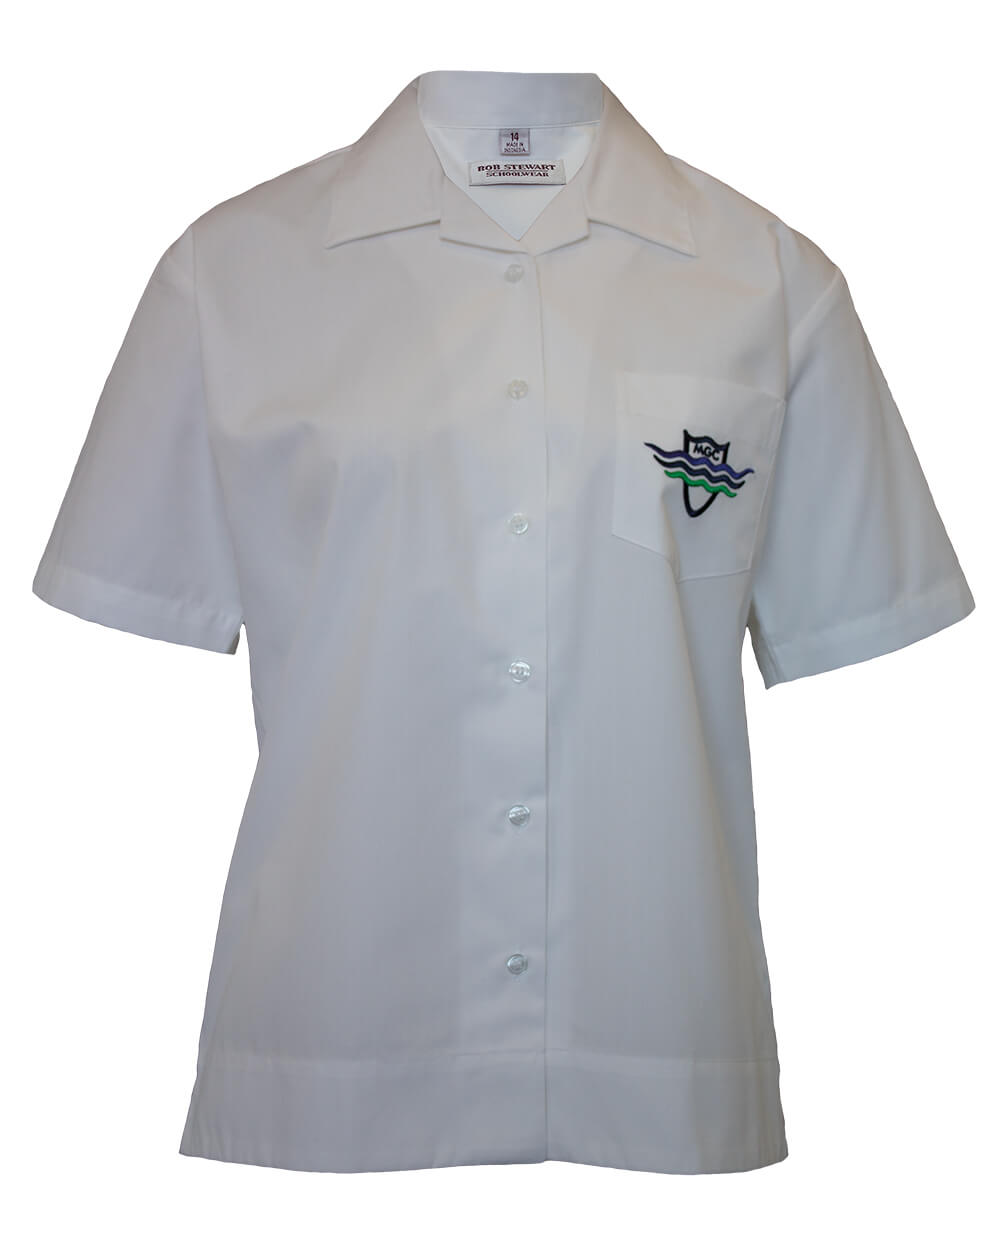 MELB GIRLS S/S BLOUSE WITH EMB | Melbourne Girls' College | Bob Stewart